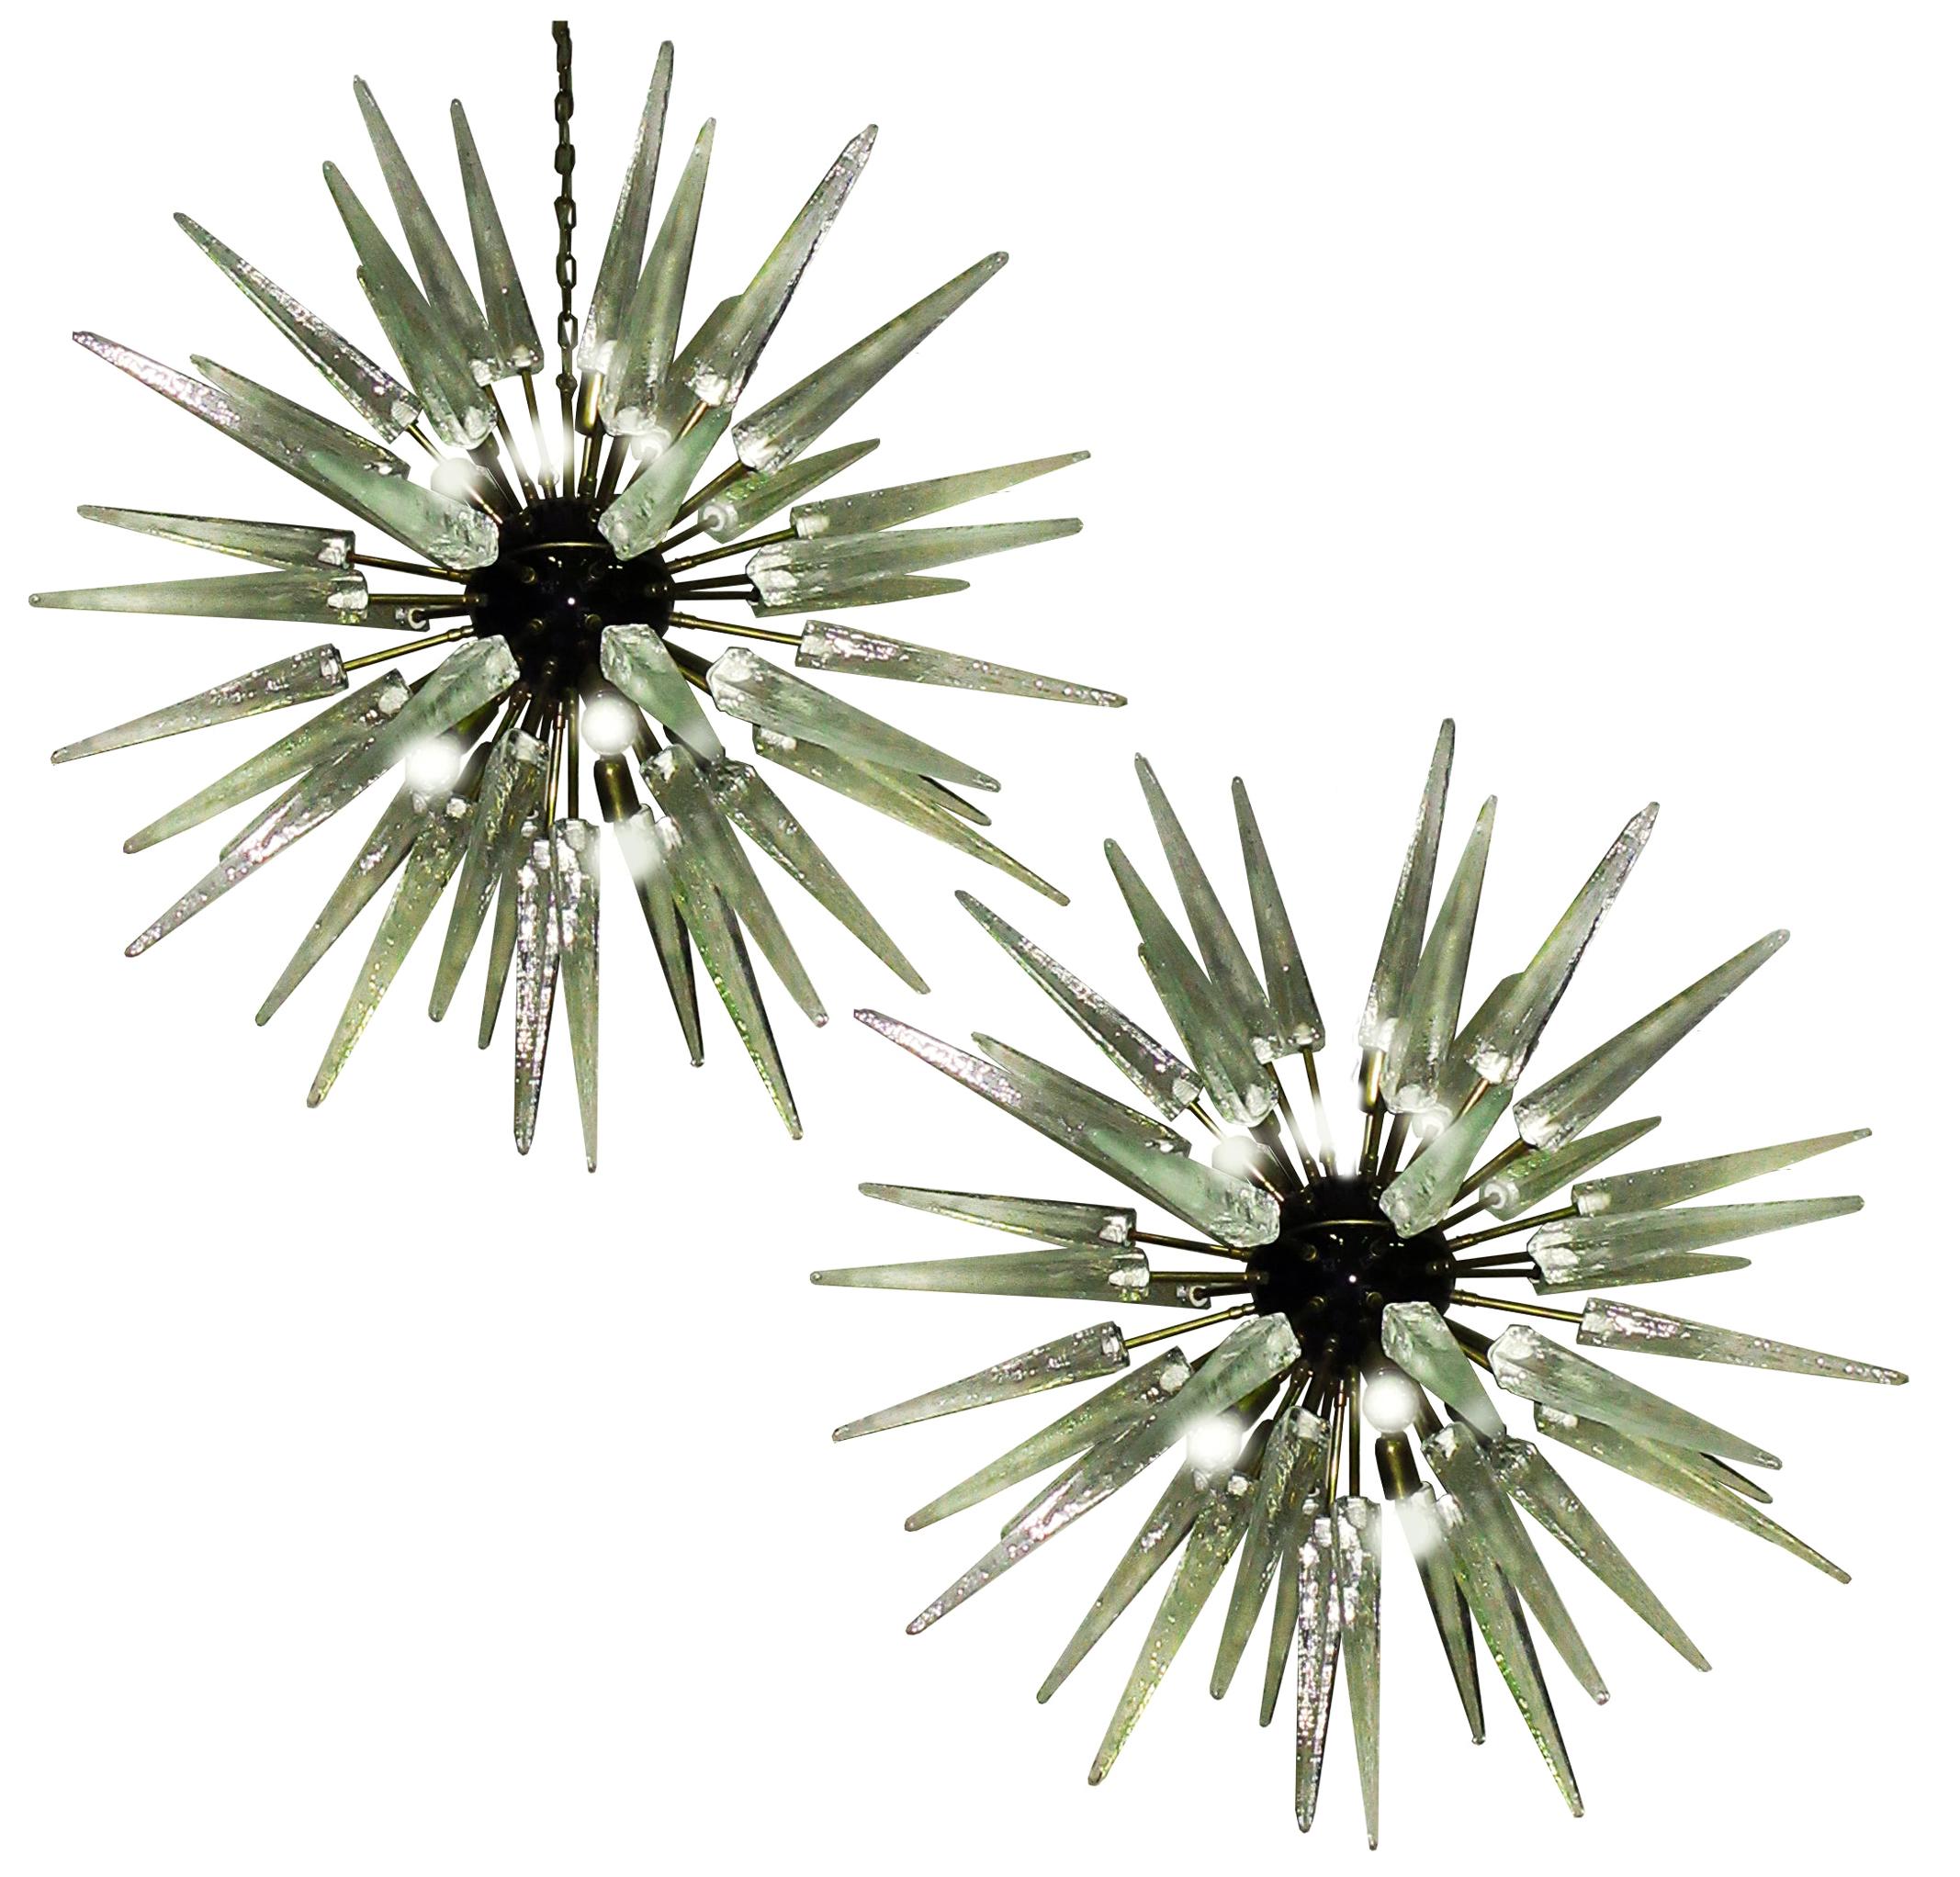 Exceptional Pair of Glass Sputnik Chandeliers, Murano